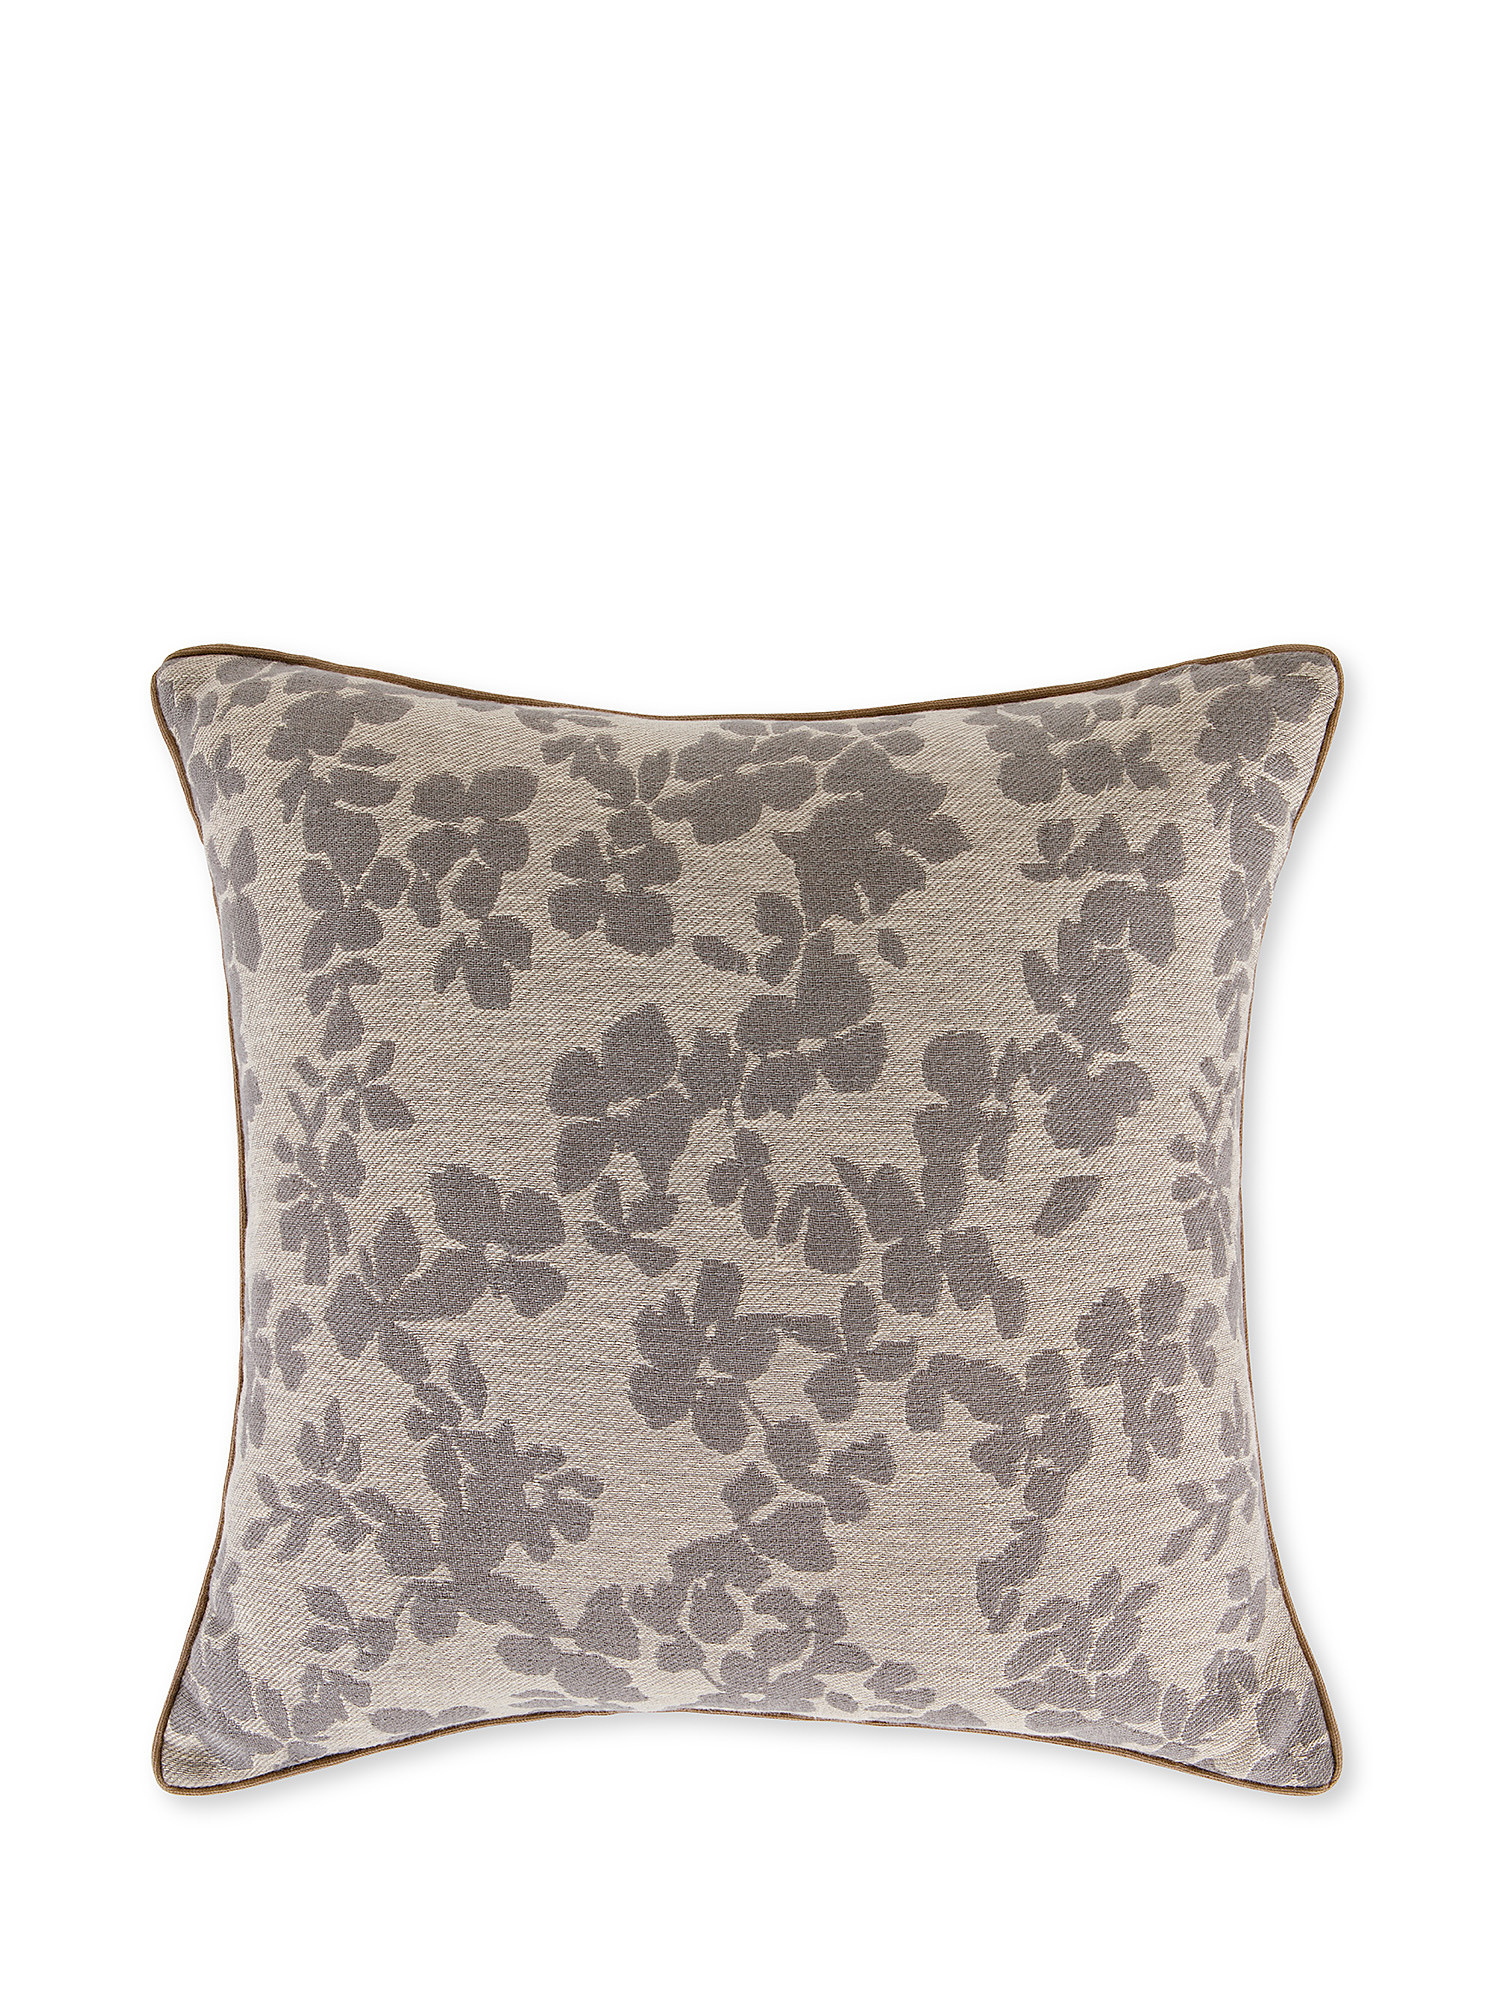 Linen and cotton jacquard cushion with floral pattern 45x45cm, Grey, large image number 0